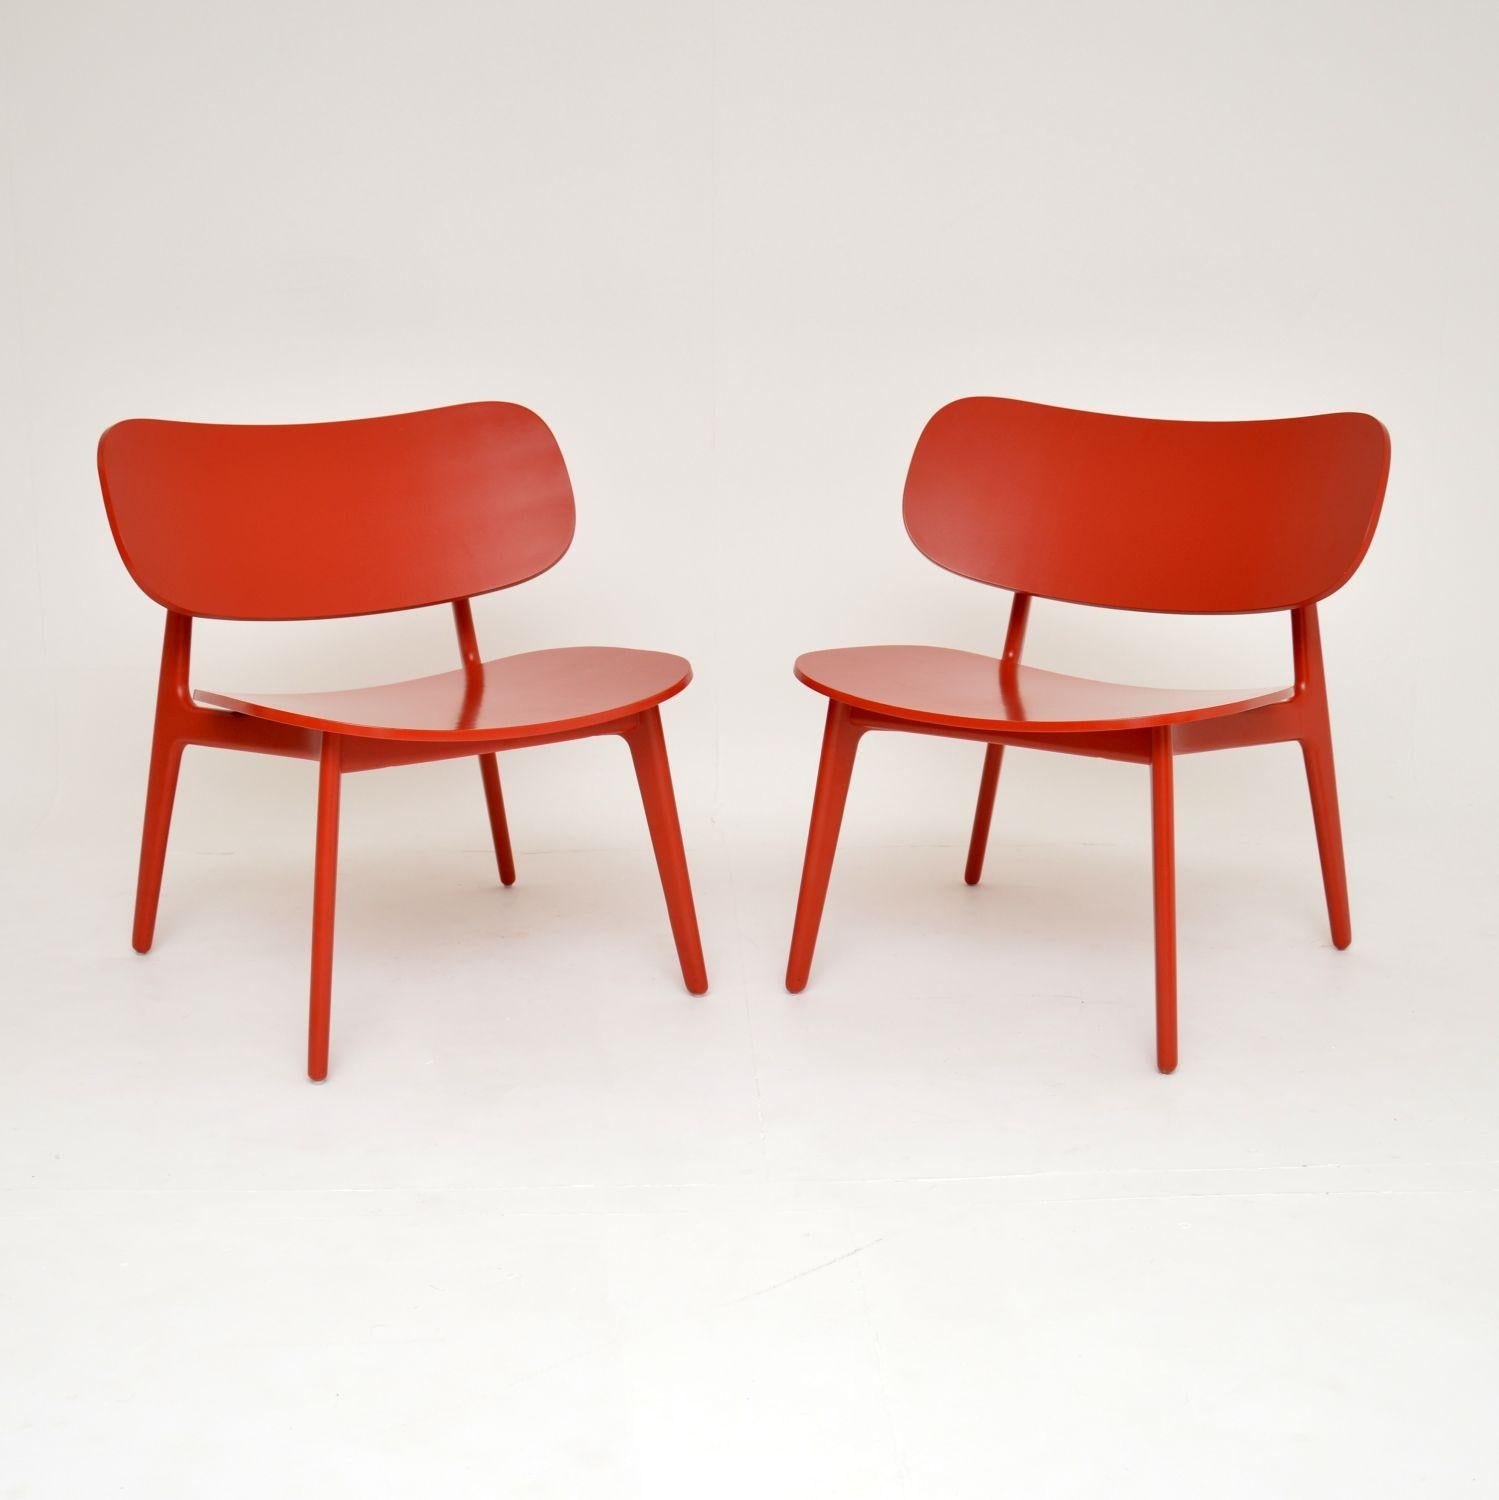 A pair of very stylish and comfortable designer easy chairs, in the mid-century modern style. These were made by Modus and were designed by London based designer Pearson Lloyd, they are fairly modern dating from the 21st century.

They have a